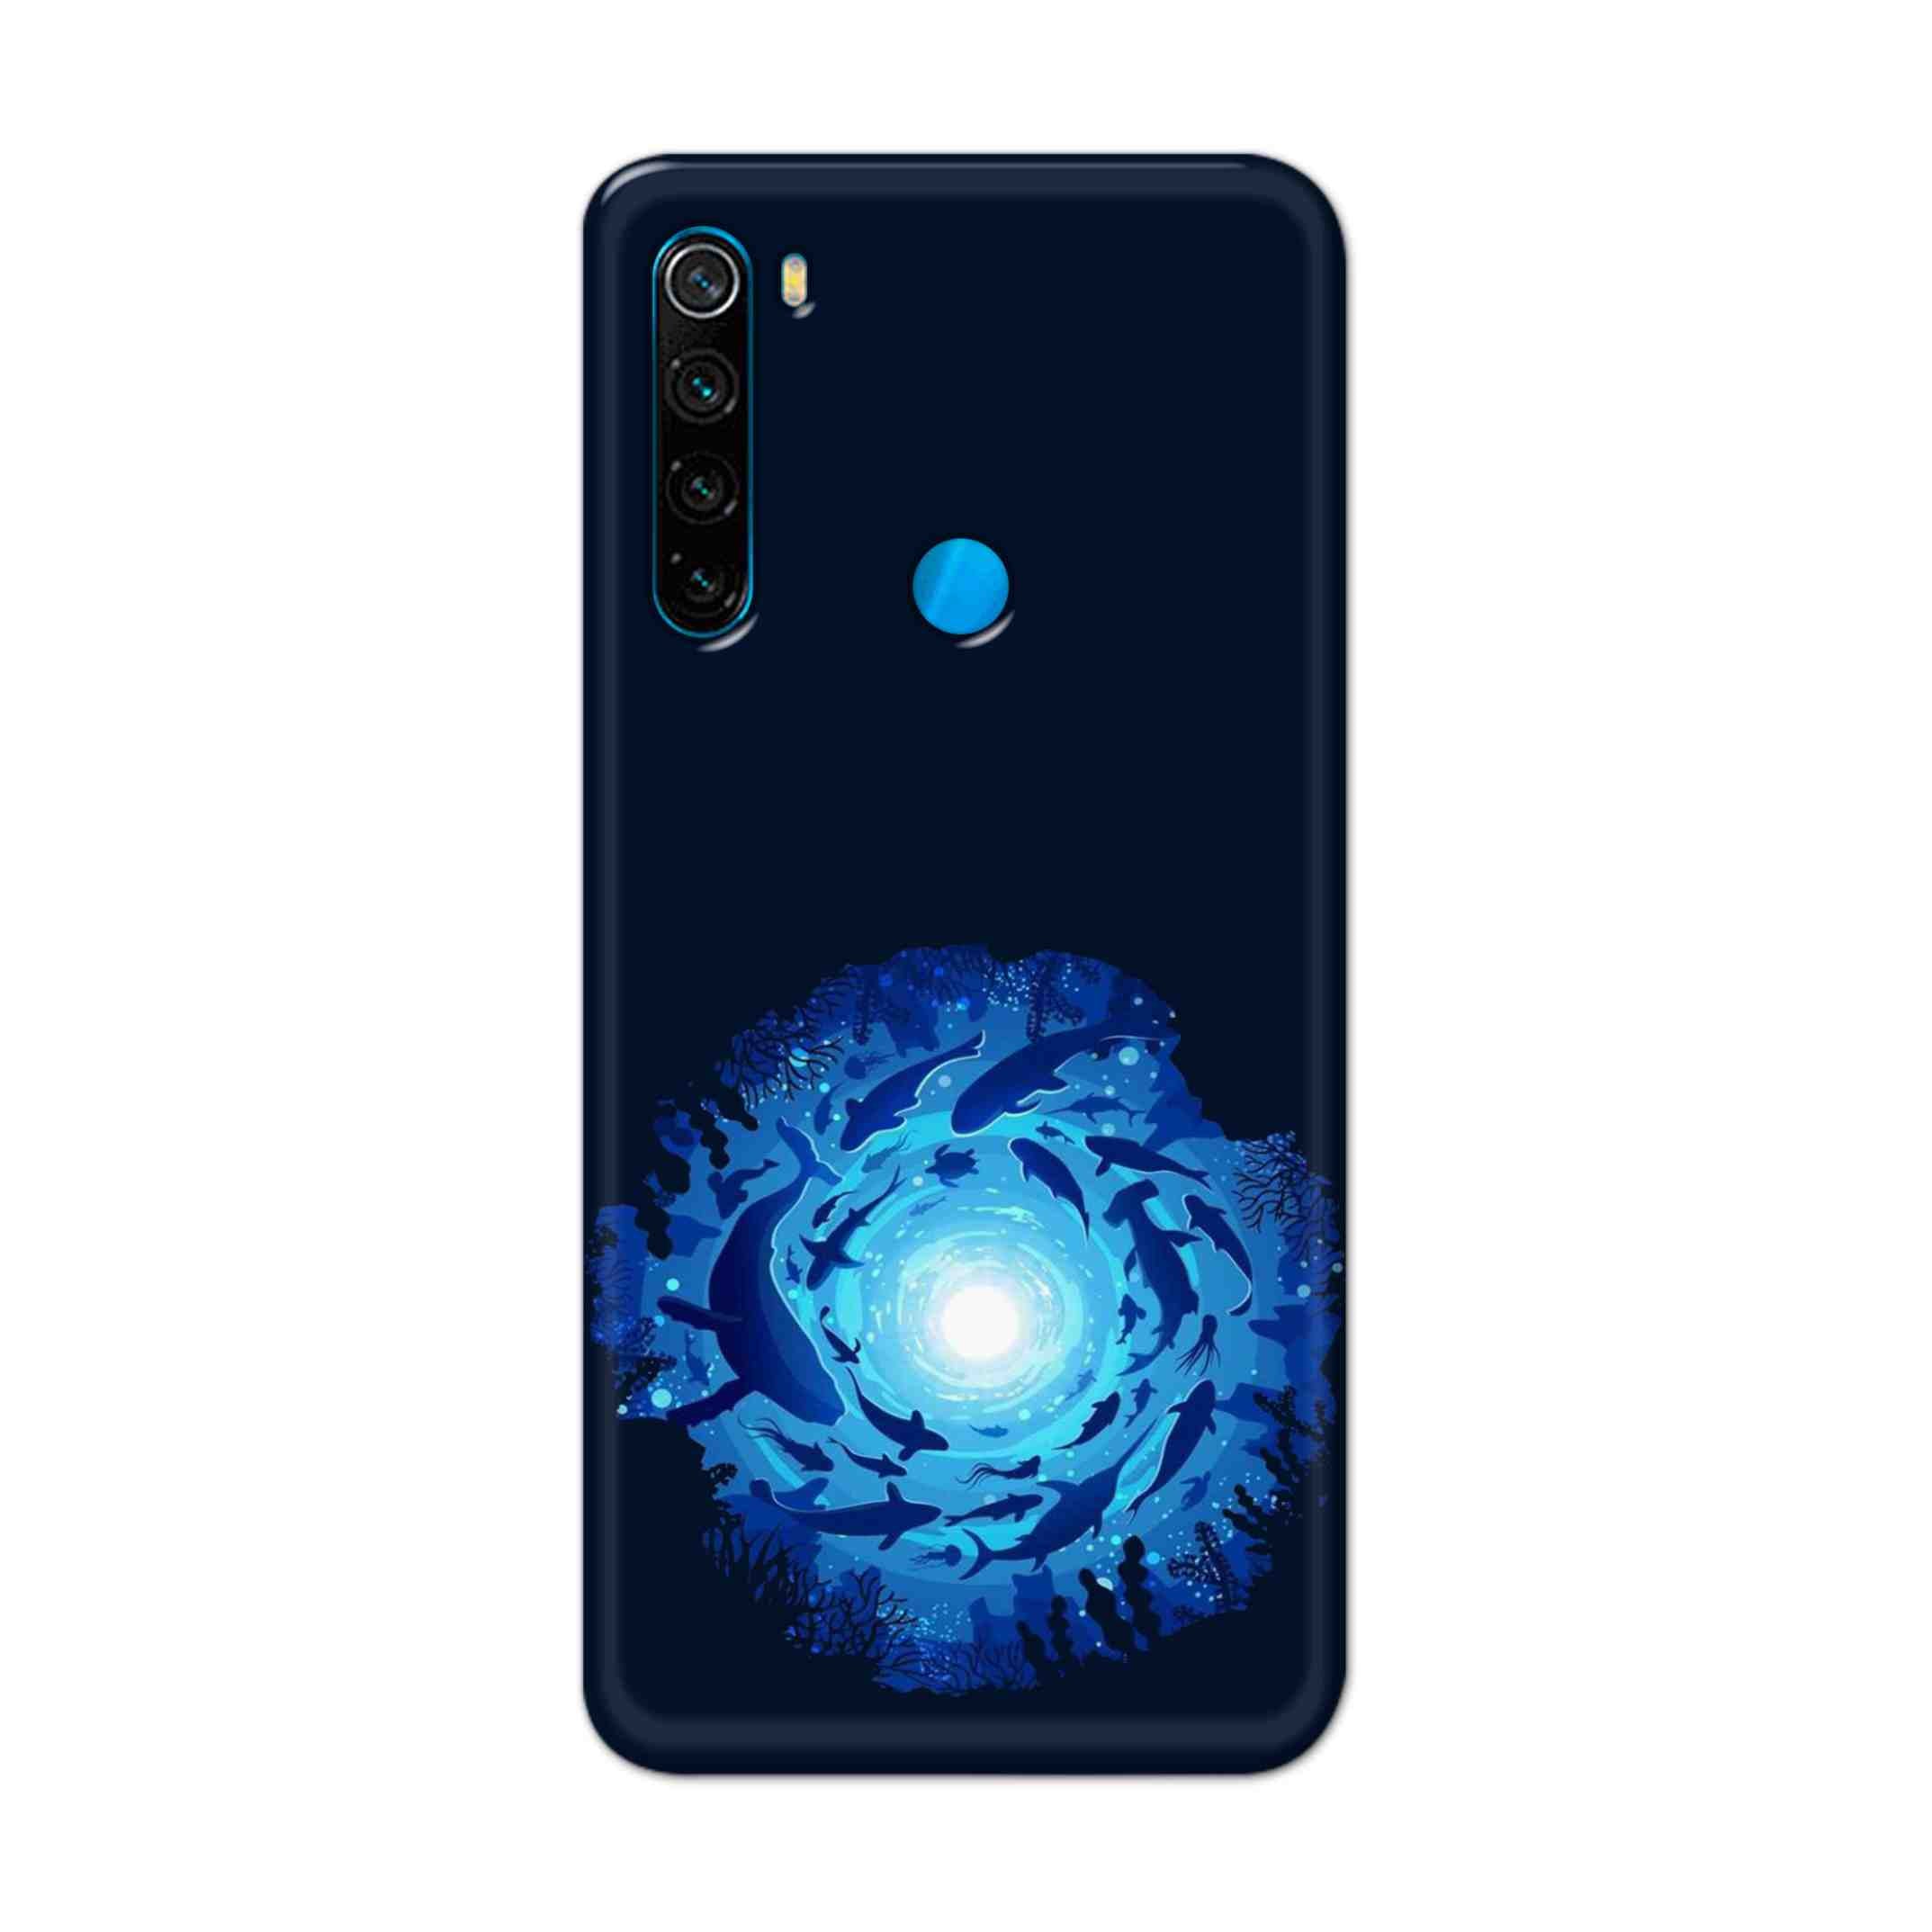 Buy Blue Whale Hard Back Mobile Phone Case Cover For Xiaomi Redmi Note 8 Online